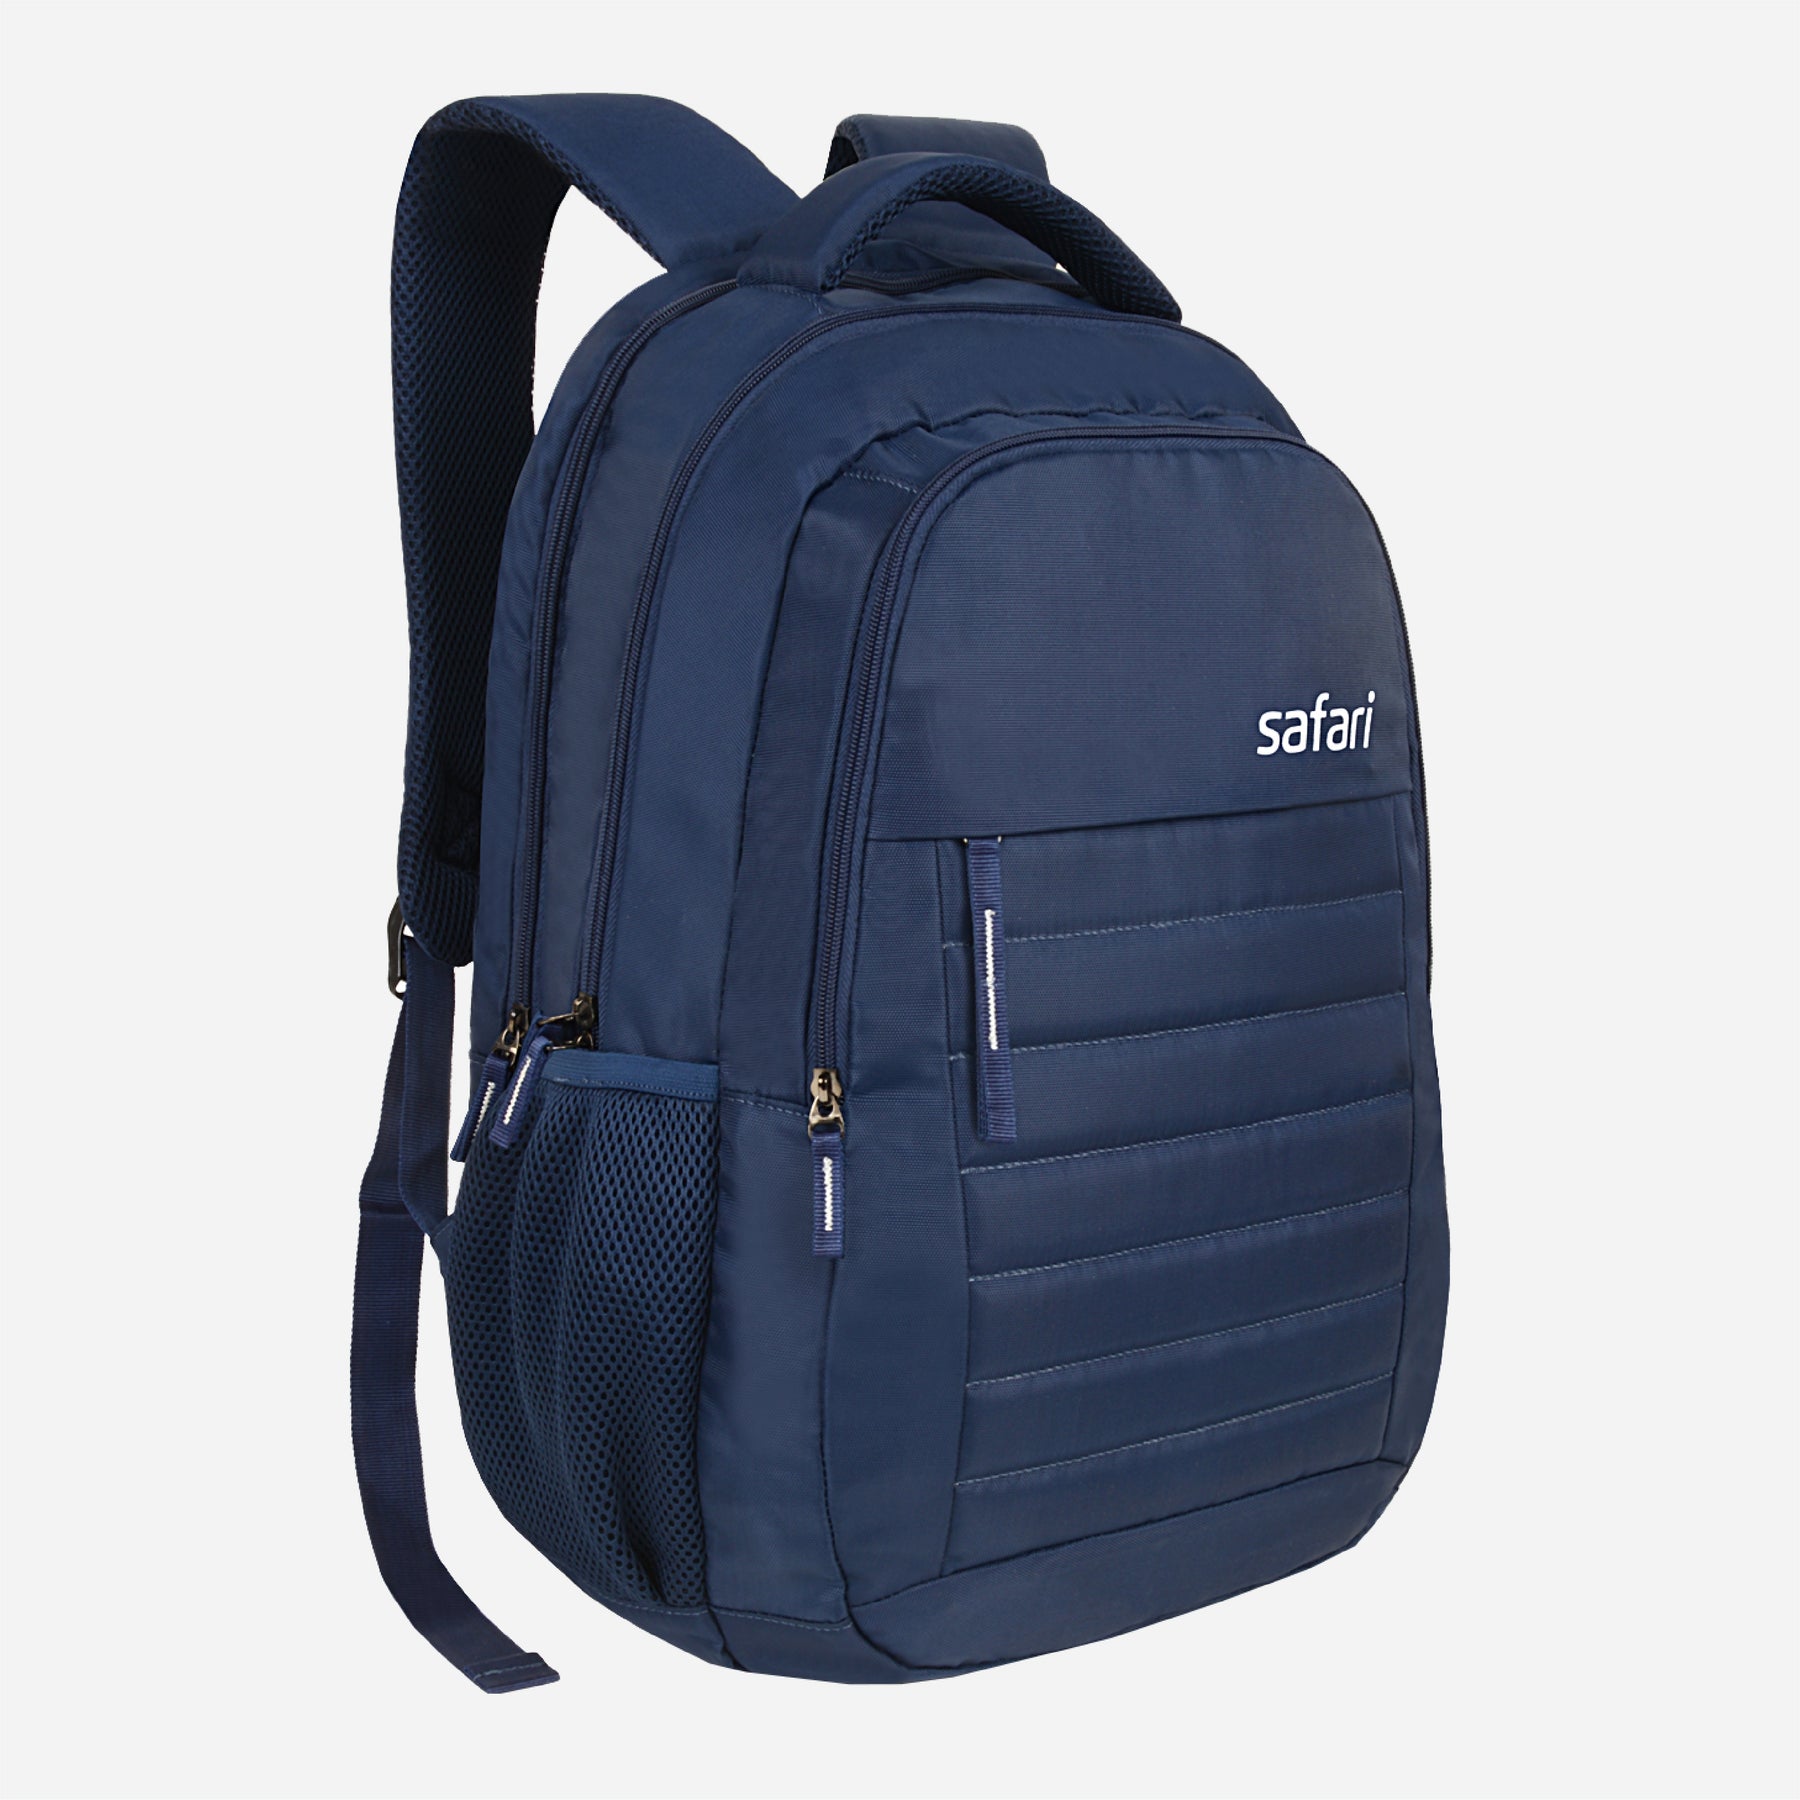 Deluxe Laptop Backpack - Blue